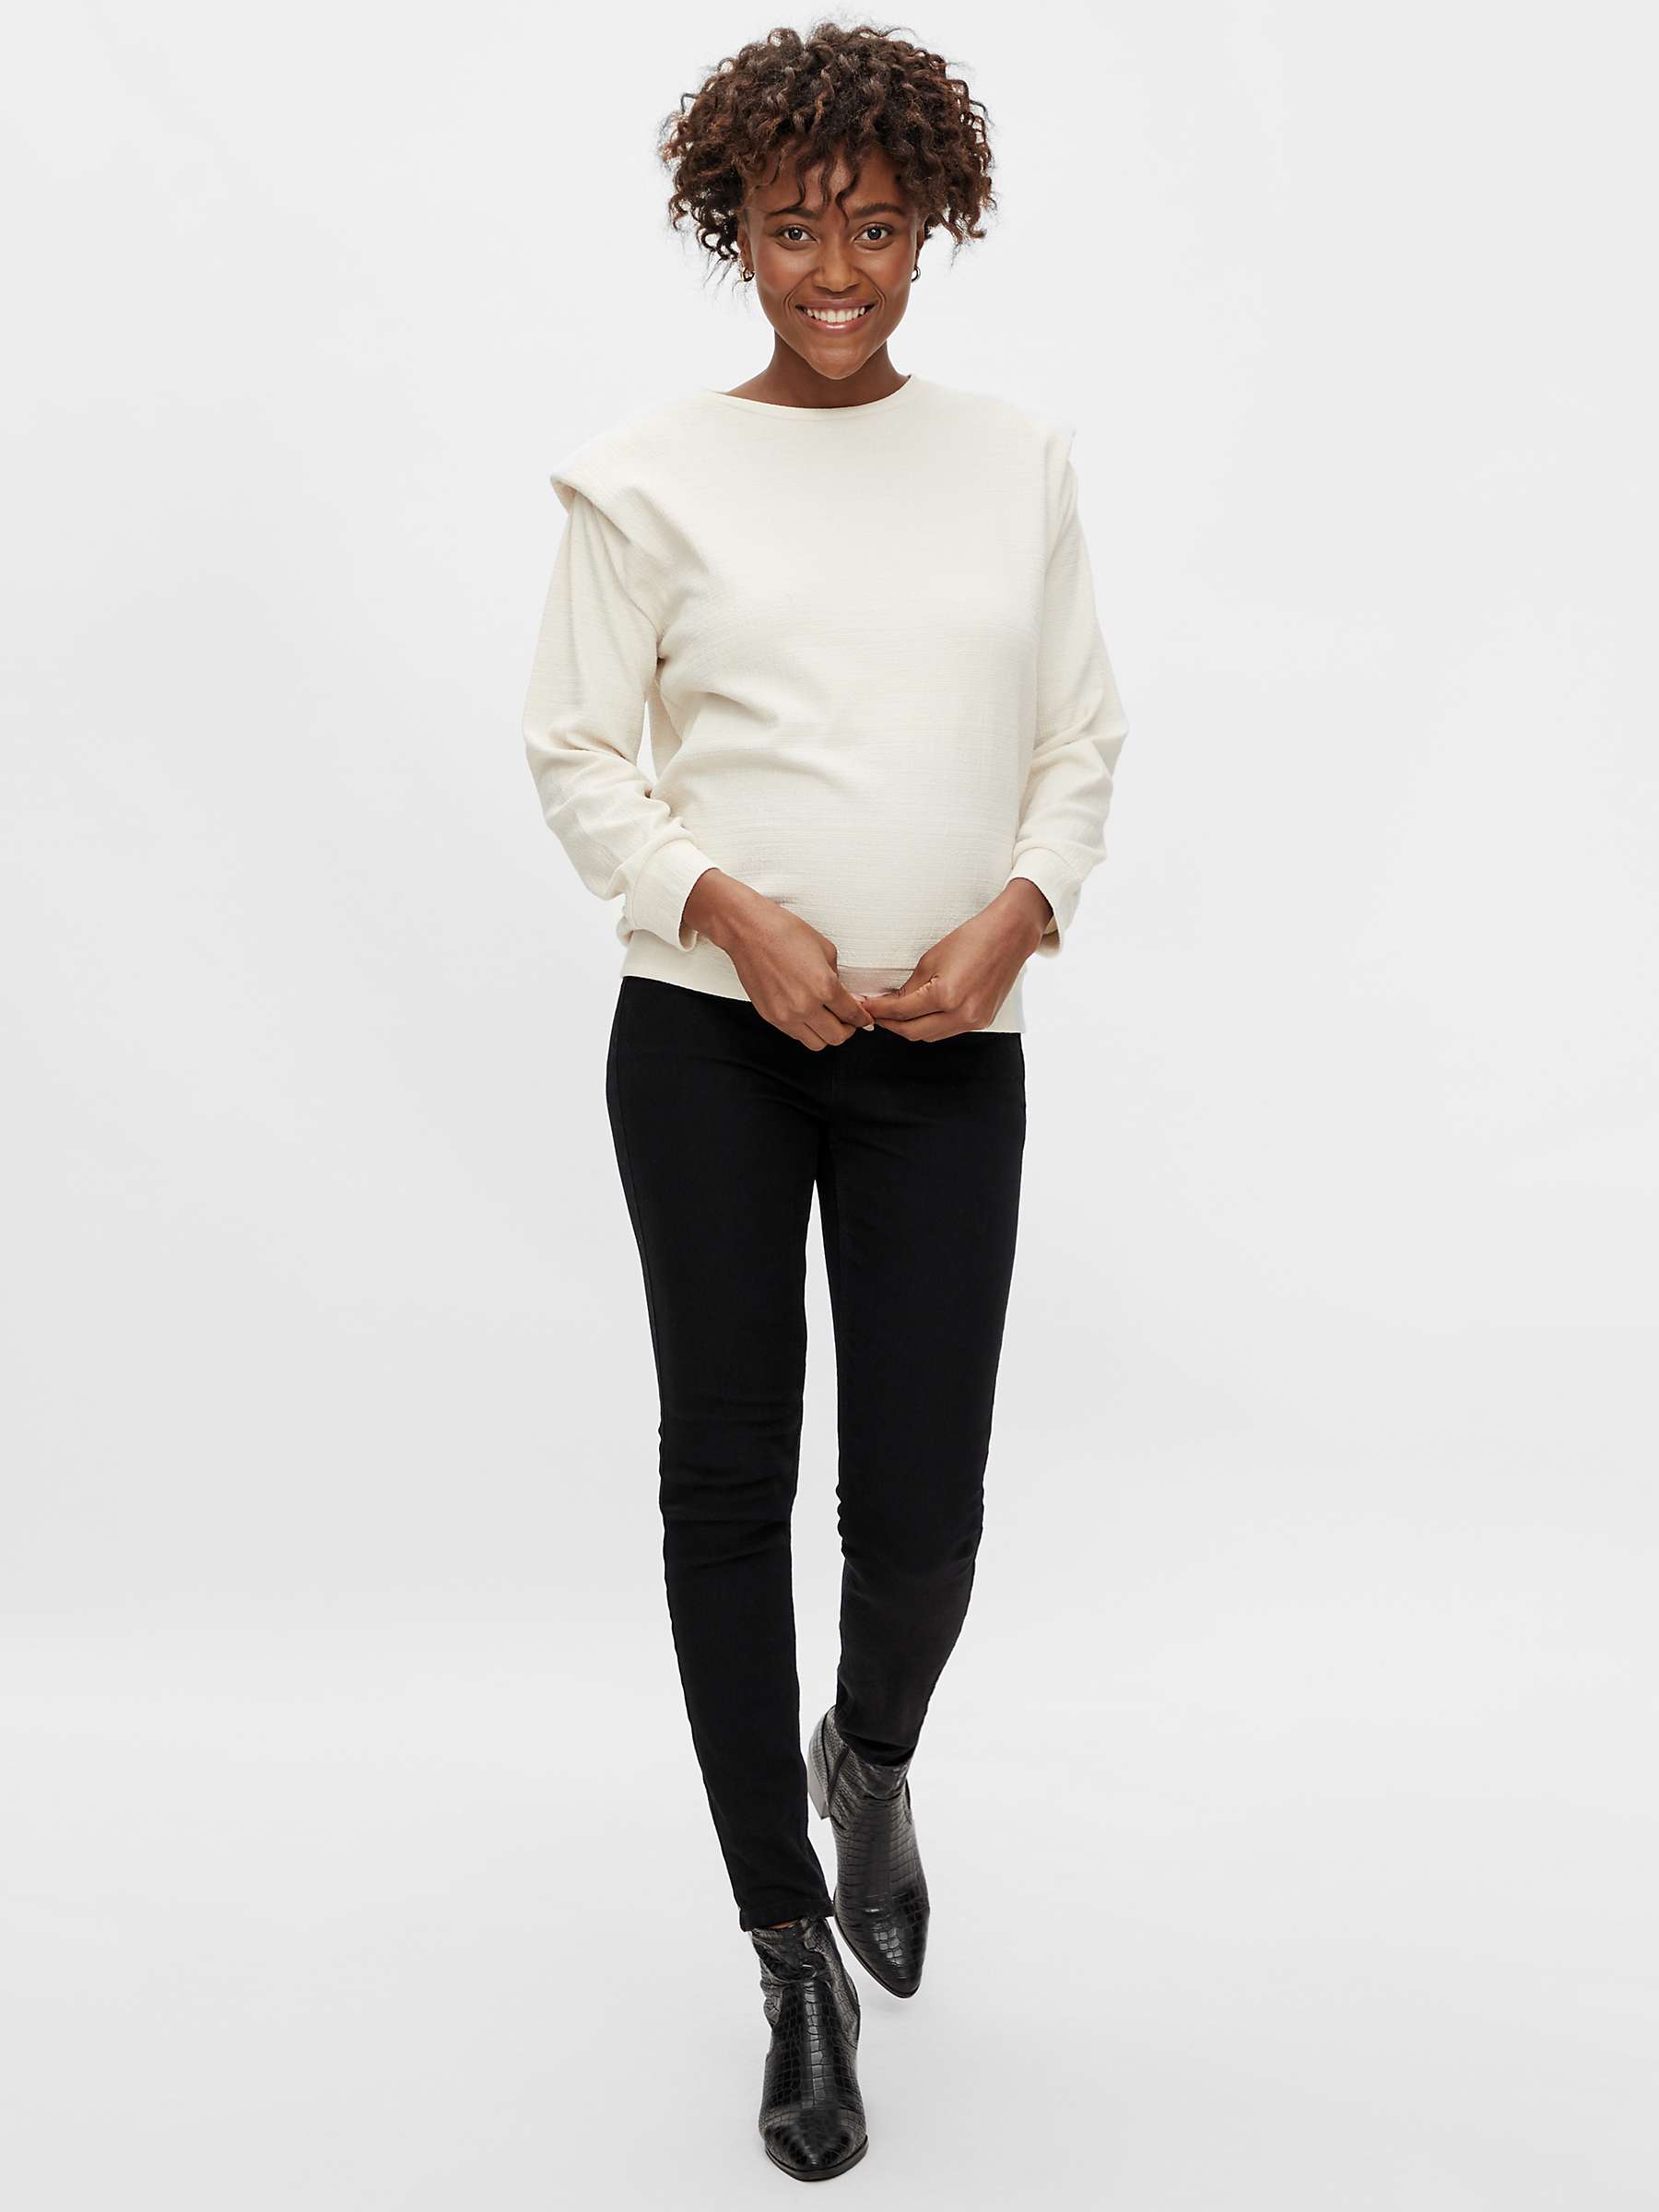 Buy Mamalicious Amy Skinny Maternity Jeggings Online at johnlewis.com